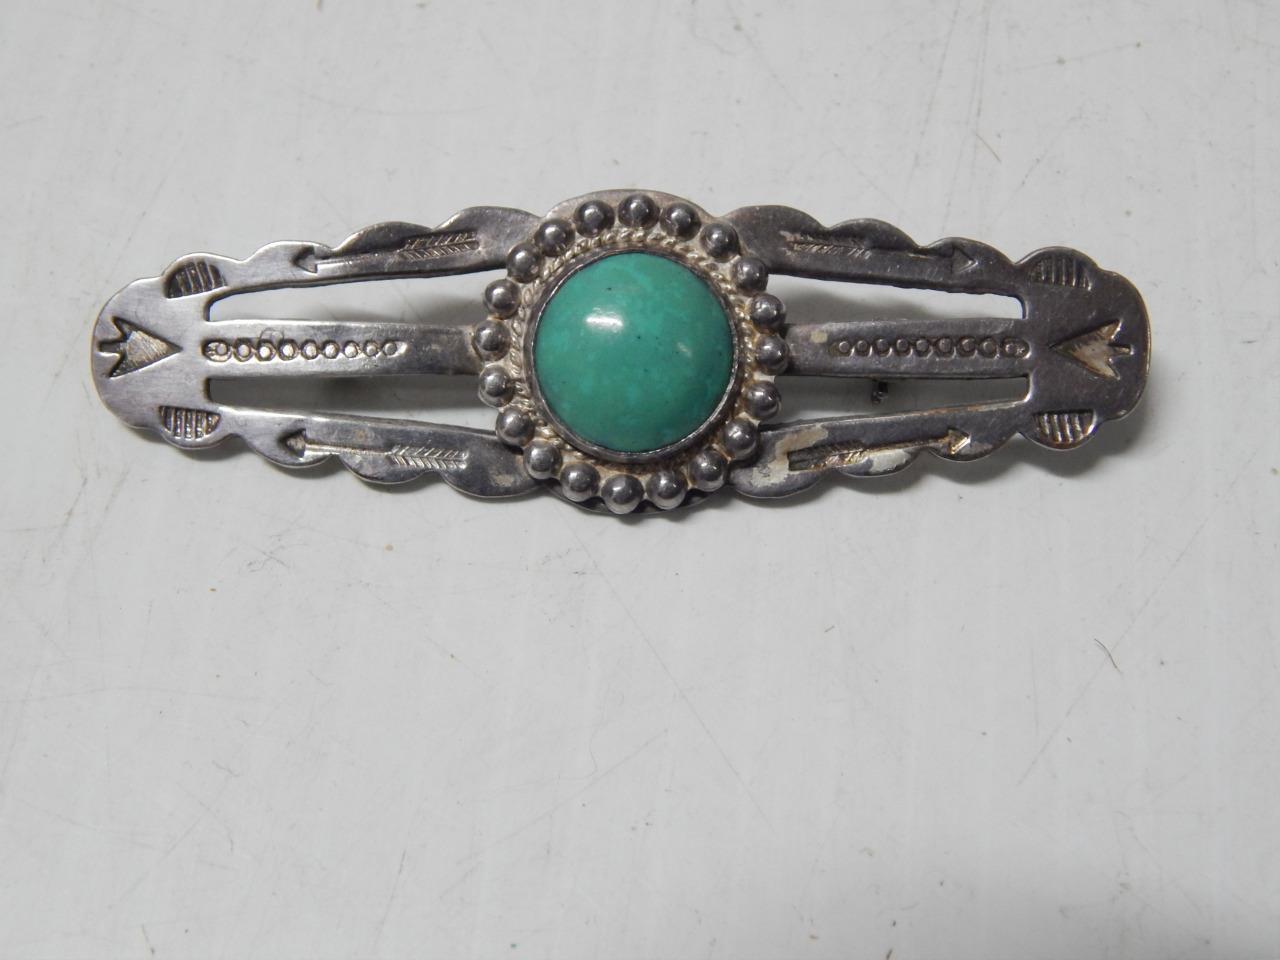 VINTAGE FRED HARVEY c1930-40s NAVAJO INDIAN STERLING SILVER TURQUOISE BAR PIN